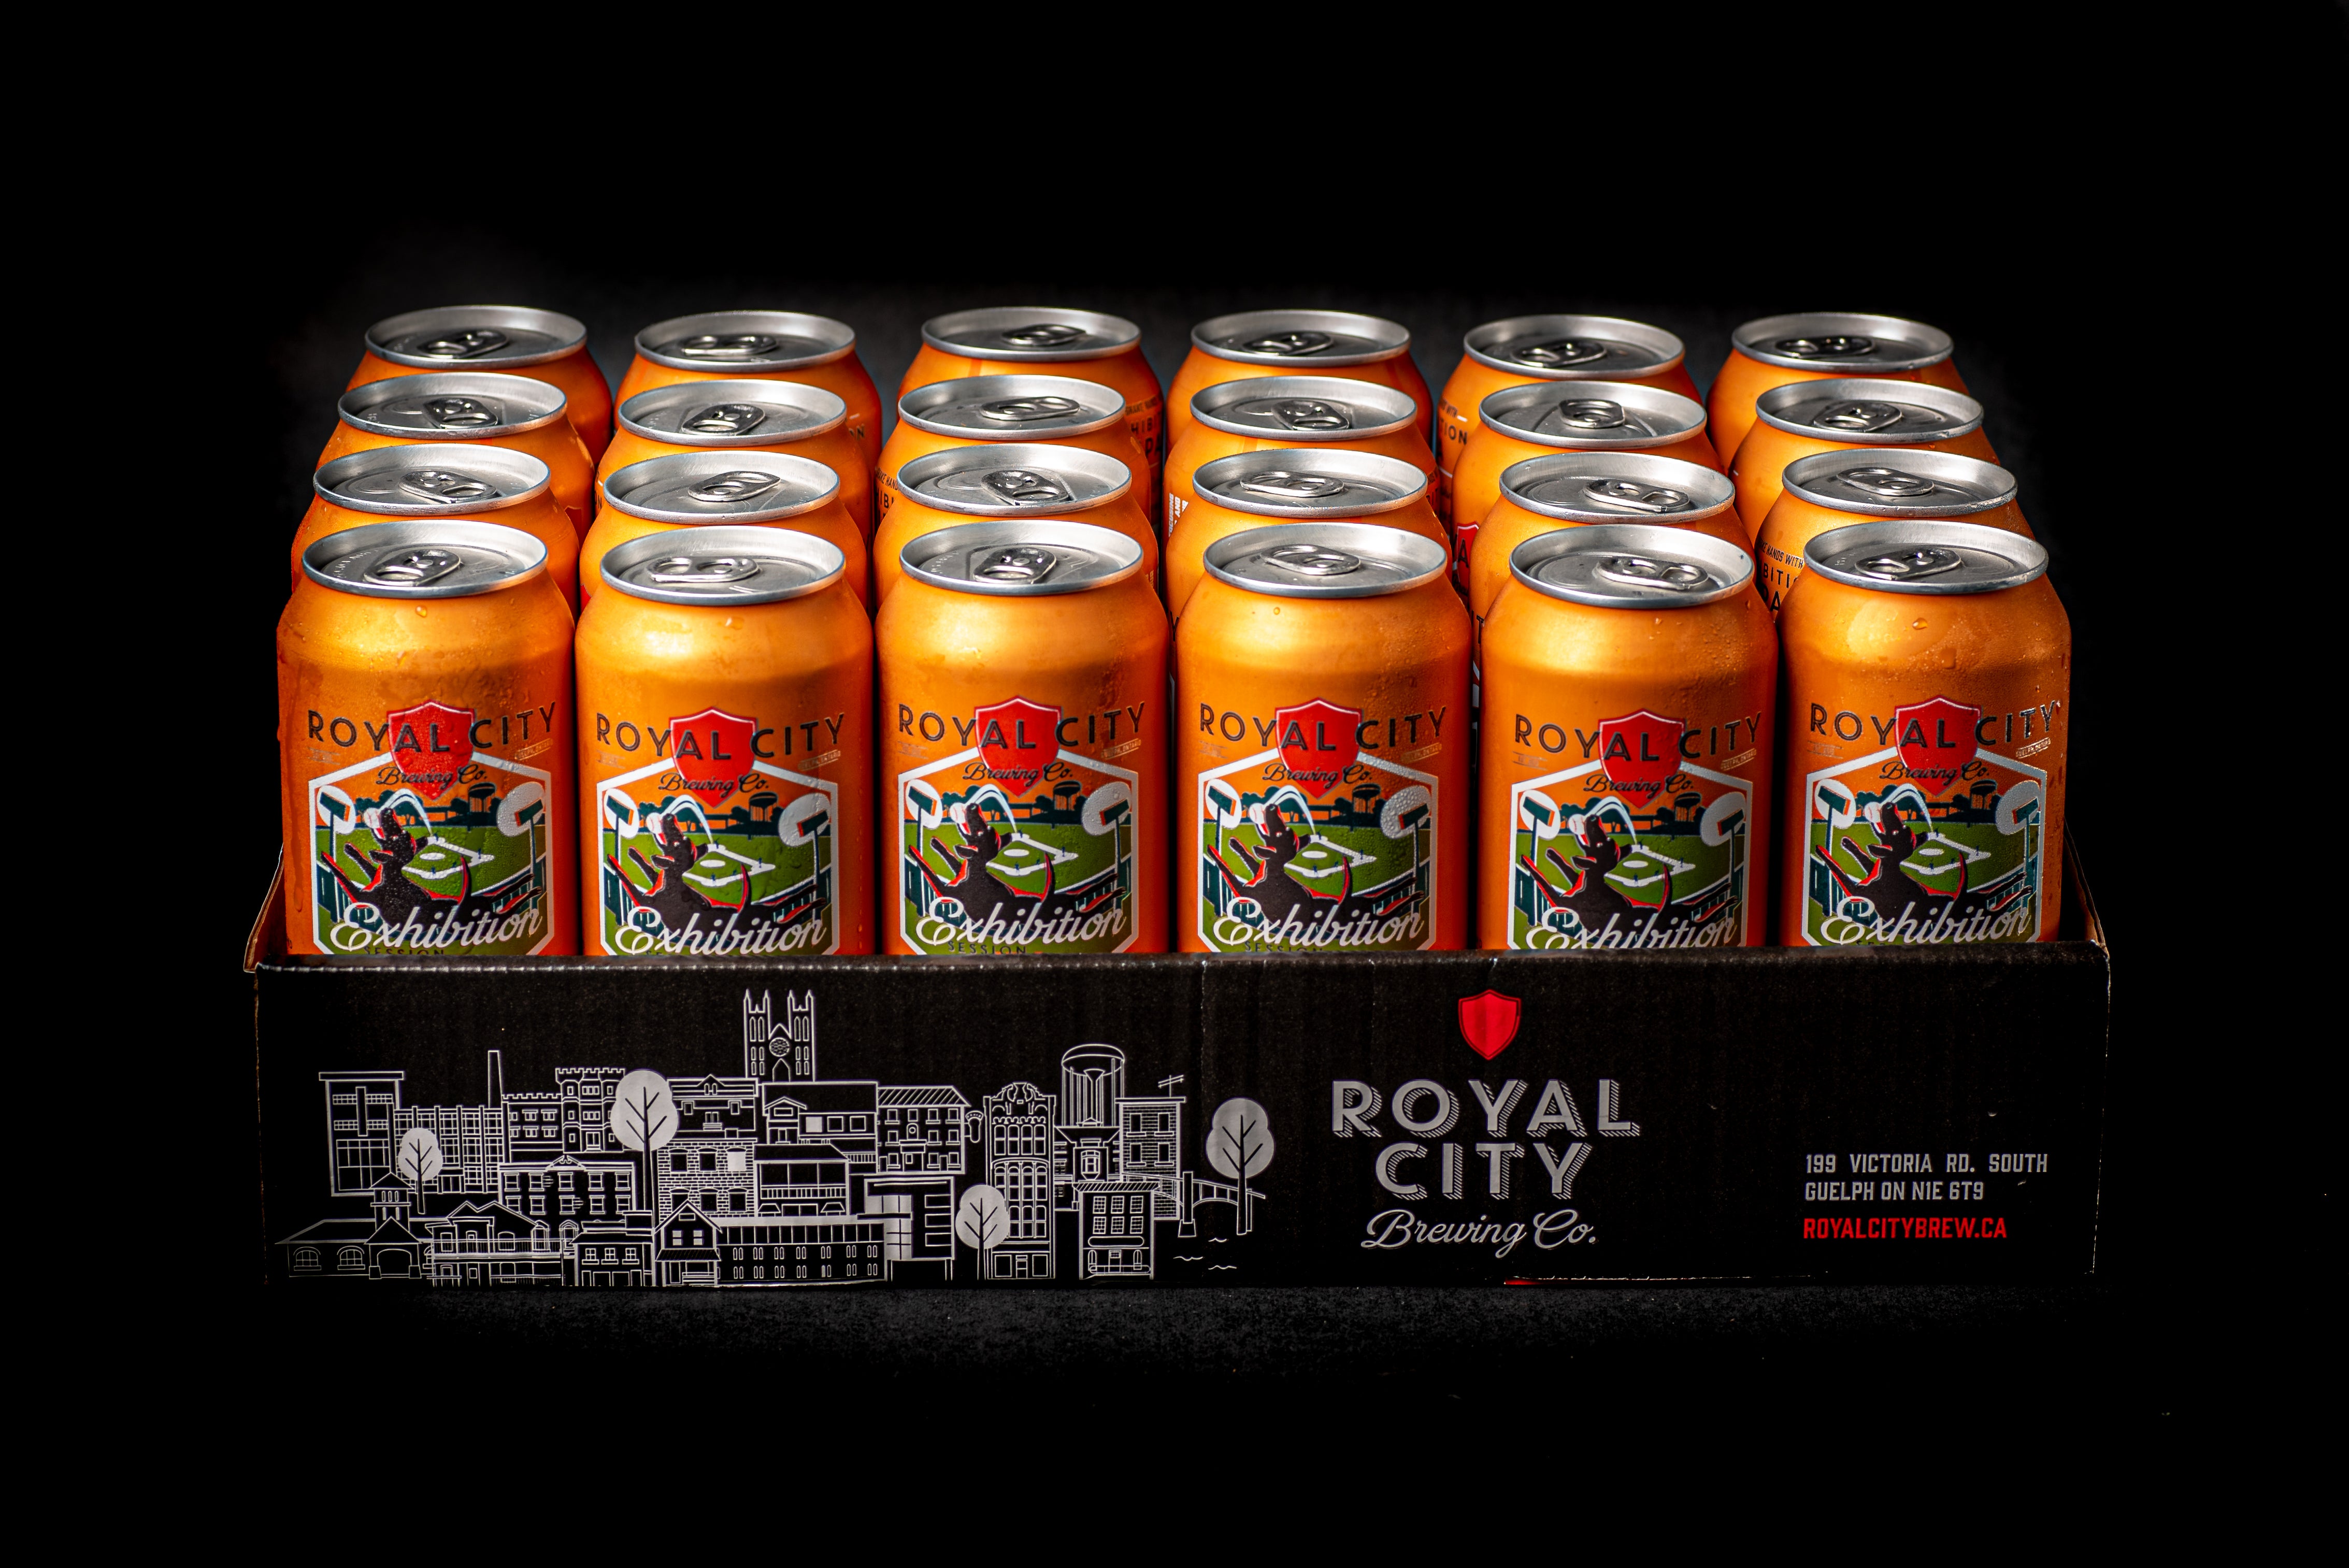 Exhibition Session IPA - Subscription – Royal City Brewing Co.